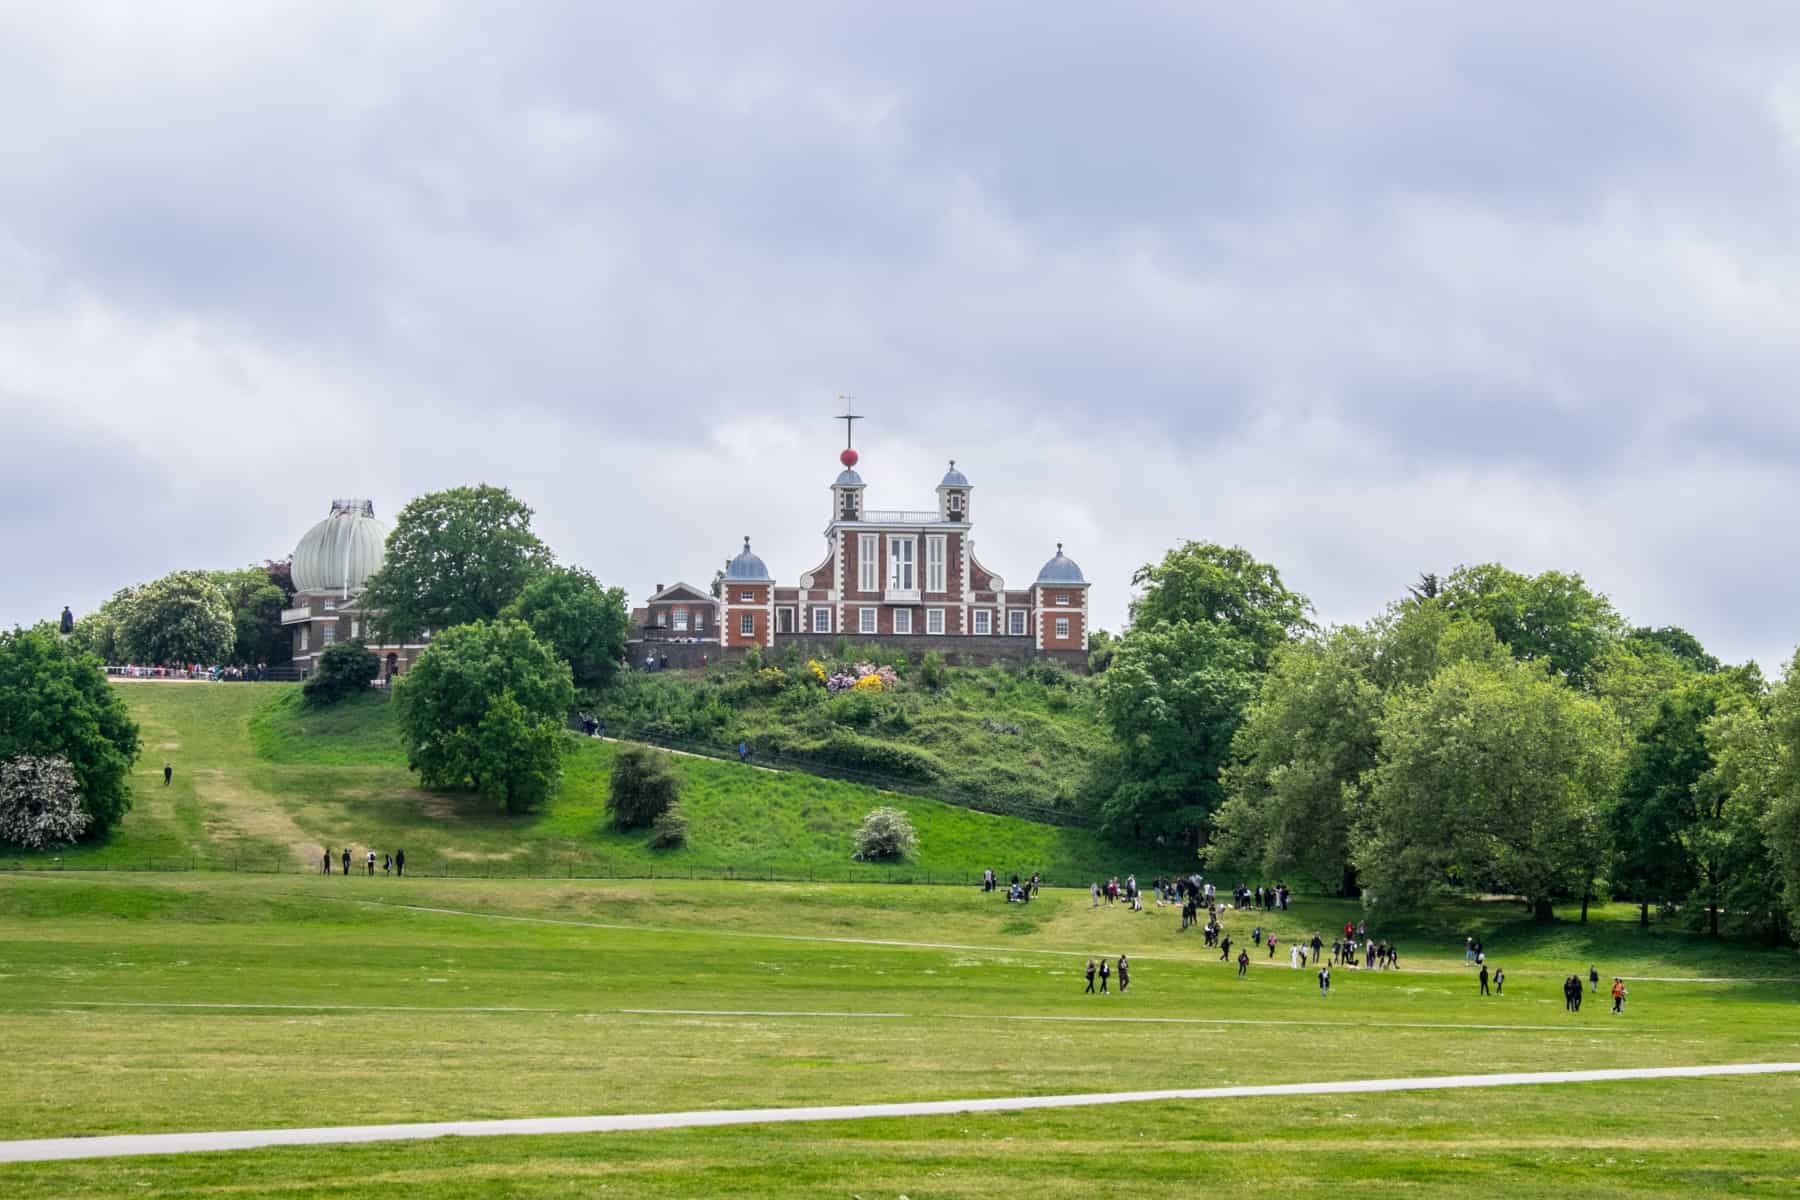 The red brick and white trim building of the Royal Observatory on the hill in Greenwich Park.